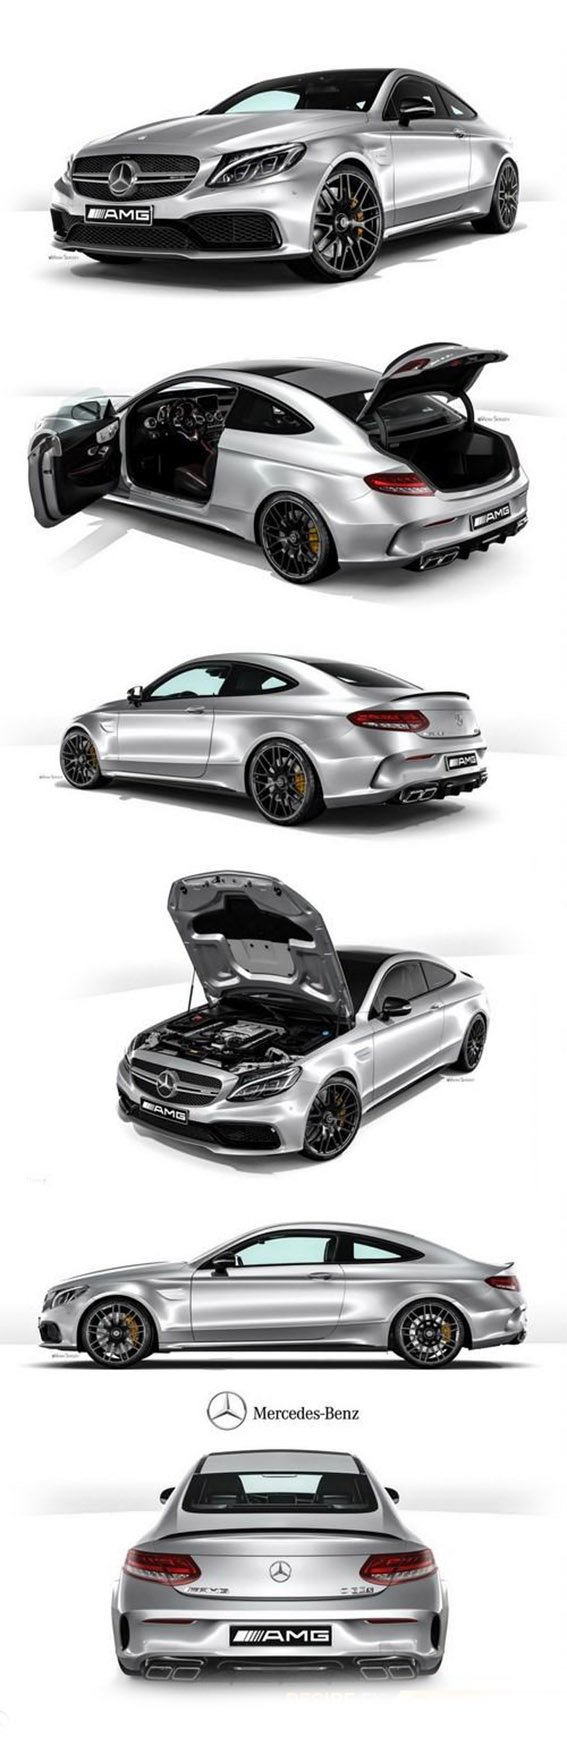 Mercedes-Benz C63 AMG Coupe 2016